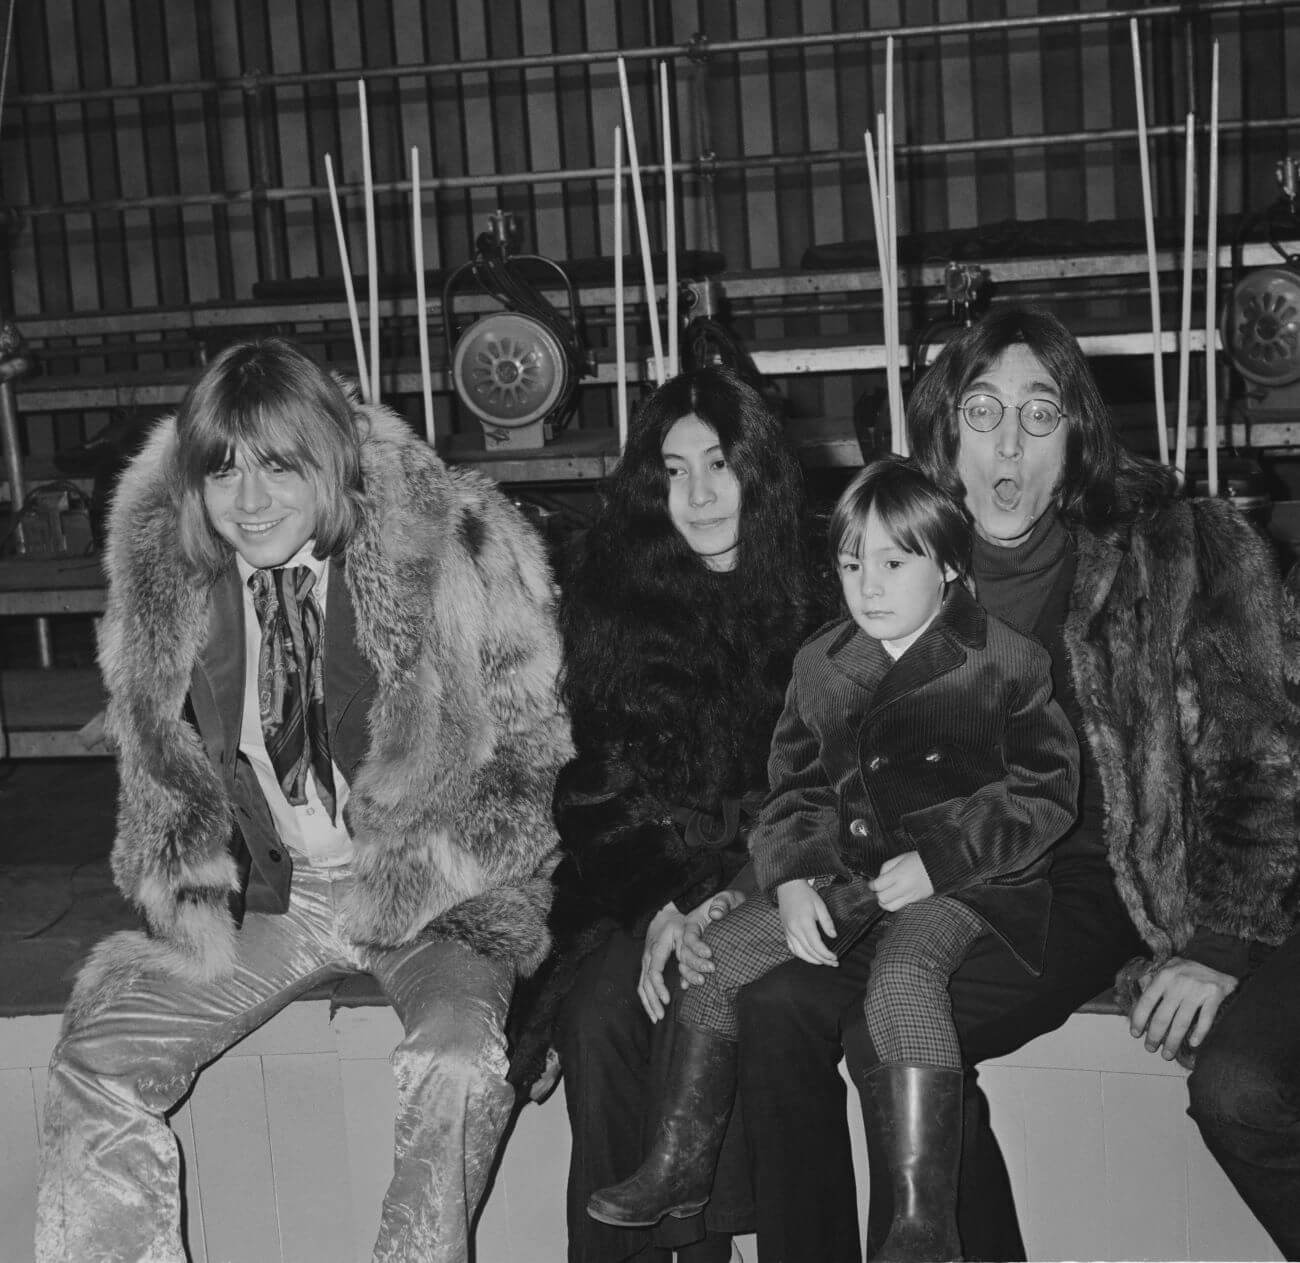 A black and white picture of Brian Jones, Yoko Ono, Julian Lennon, and John Lennon sitting on a bench together. Jones and Lennon wear fur coats.